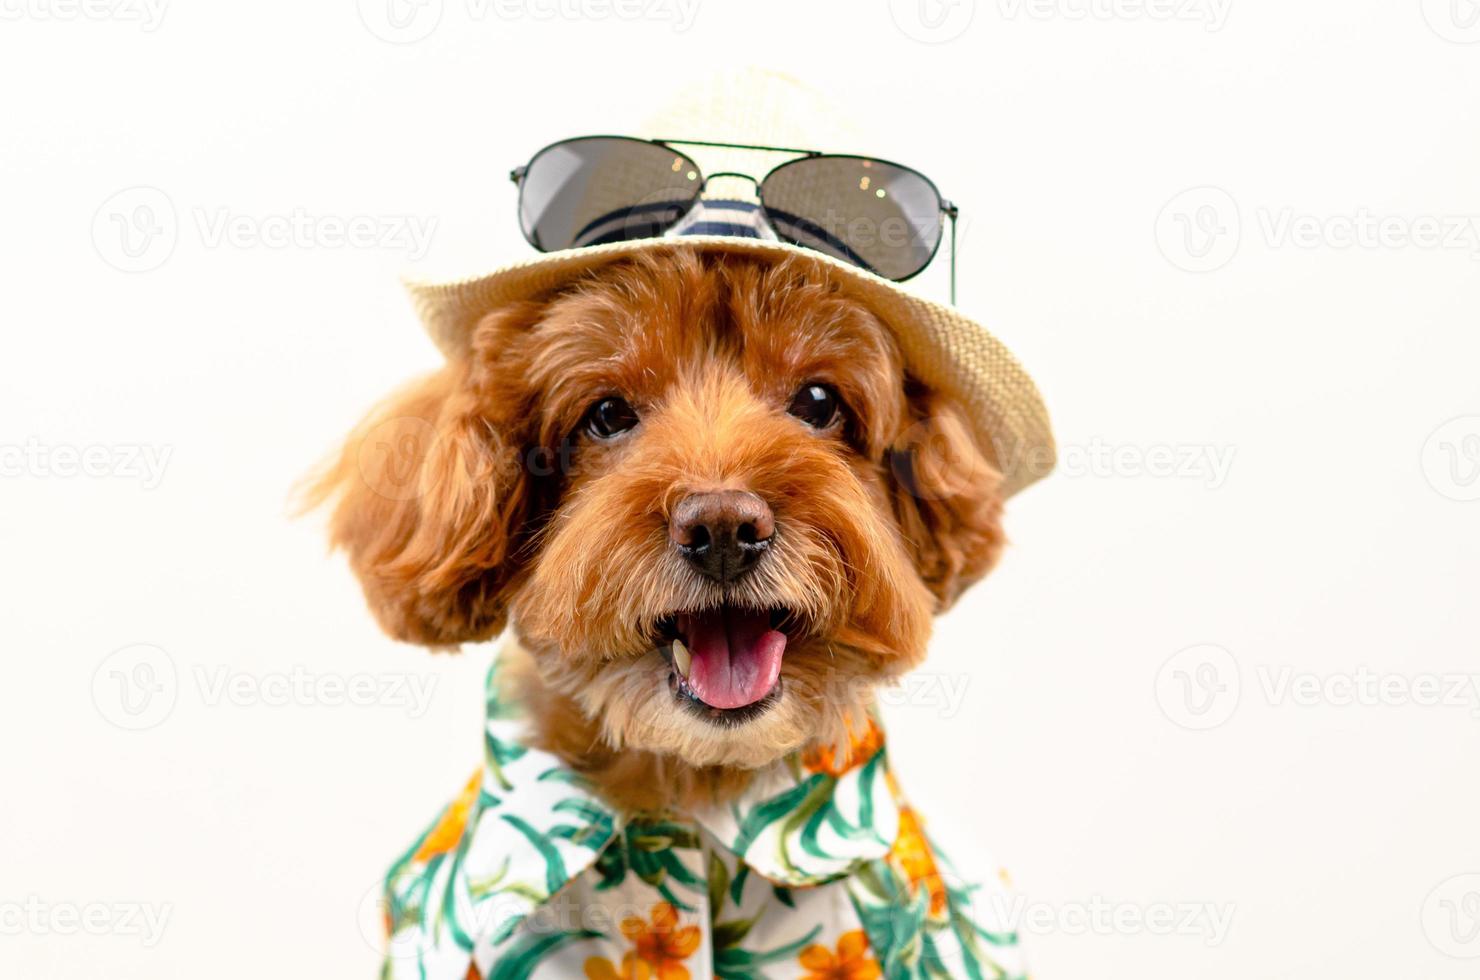 An adorable smiling brown toy Poodle dog wears hat with sunglasses on top and Hawaii dress for summer season on white background. photo